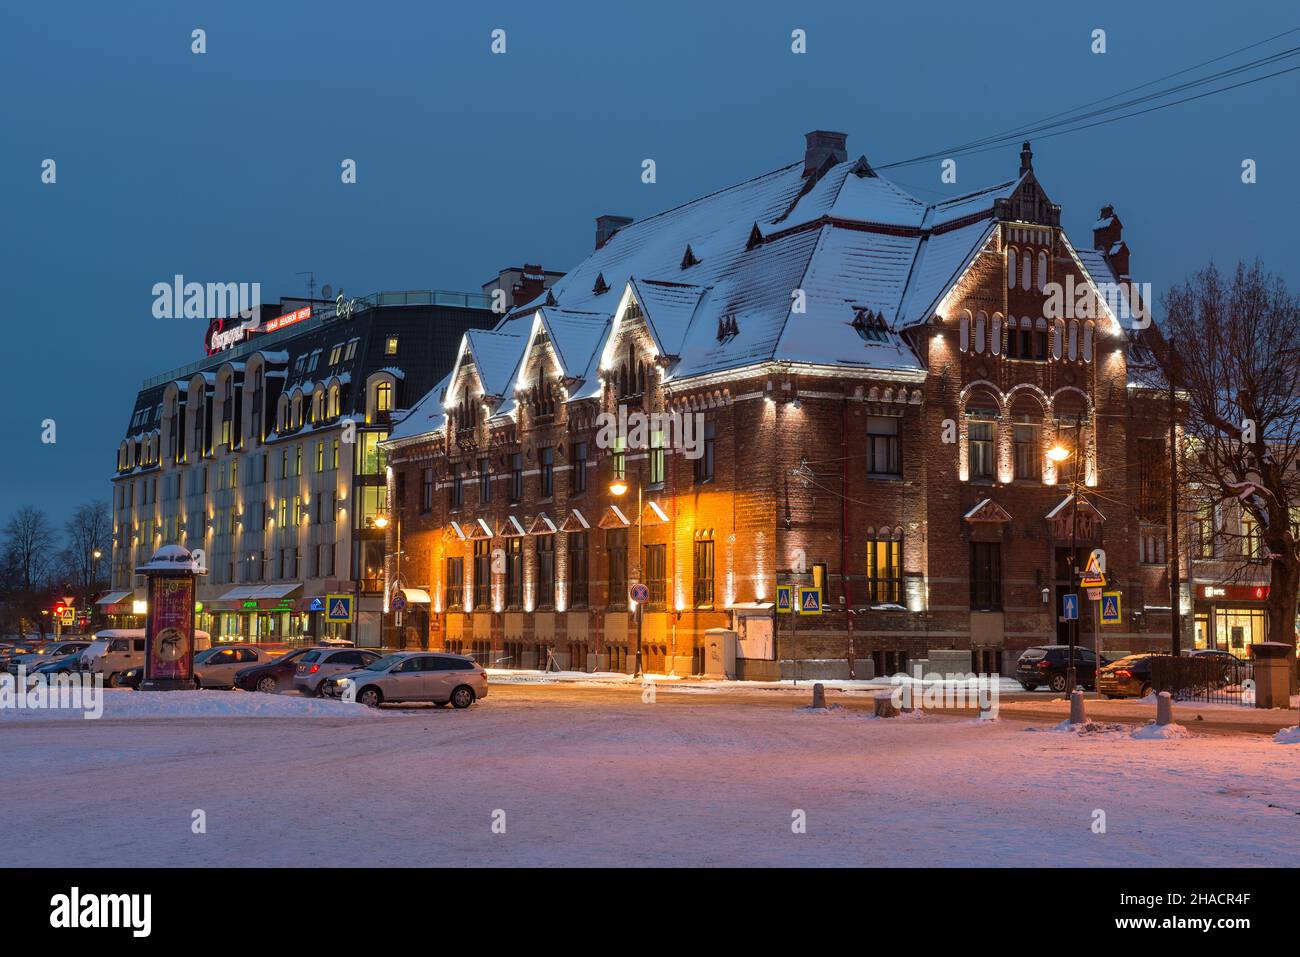 VYBORG, RUSSIA - FEBRUARY 08, 2021: February evening in Vyborg. View of the old building of the Bank of Finland Stock Photo